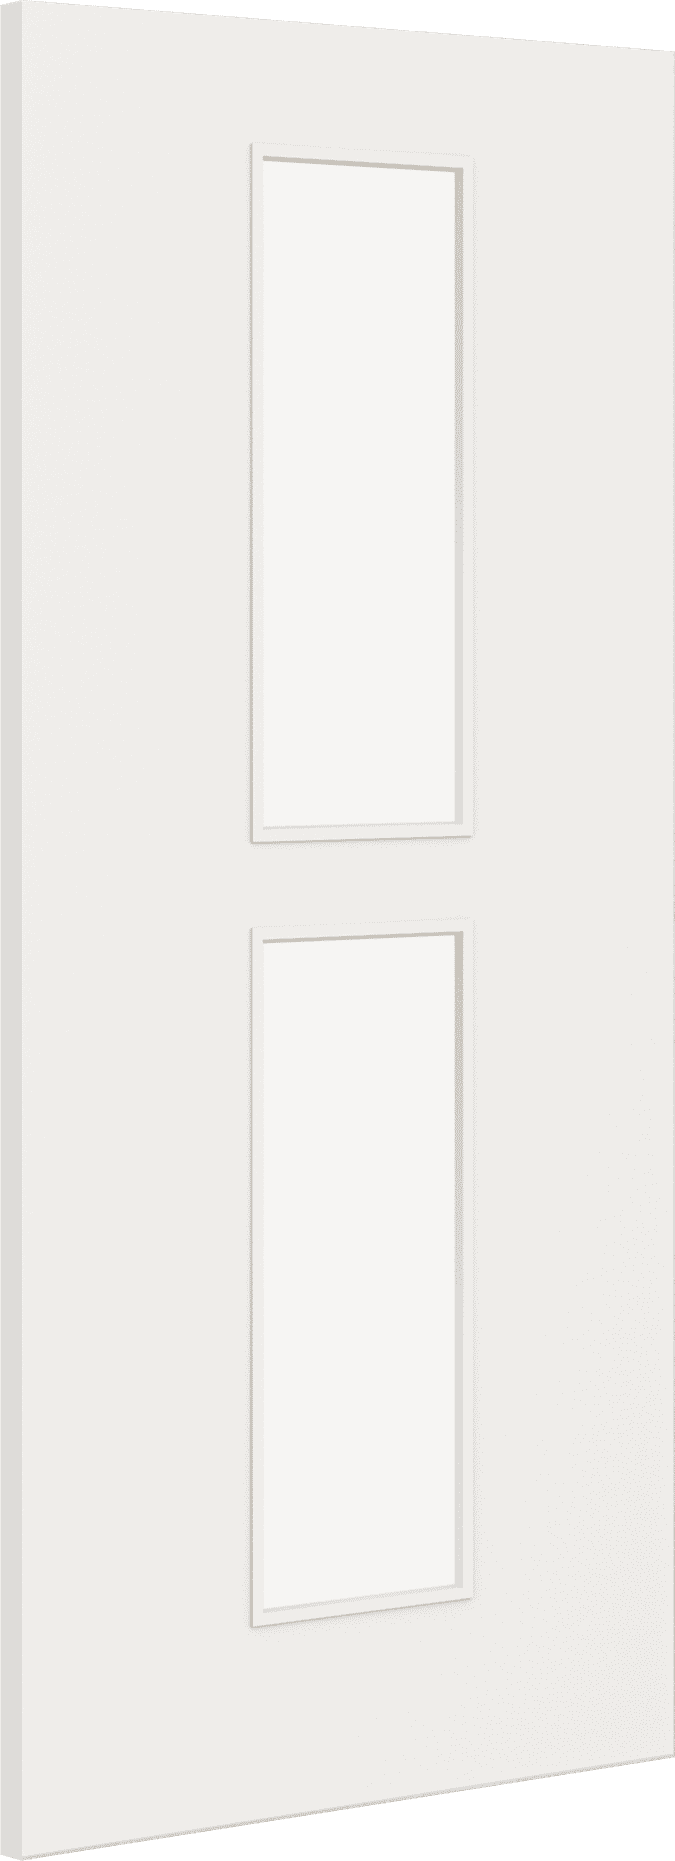 1981mm x 838mm x 44mm (33") Architectural Paint Grade White 12 Frosted Glazed Fire Door Blank